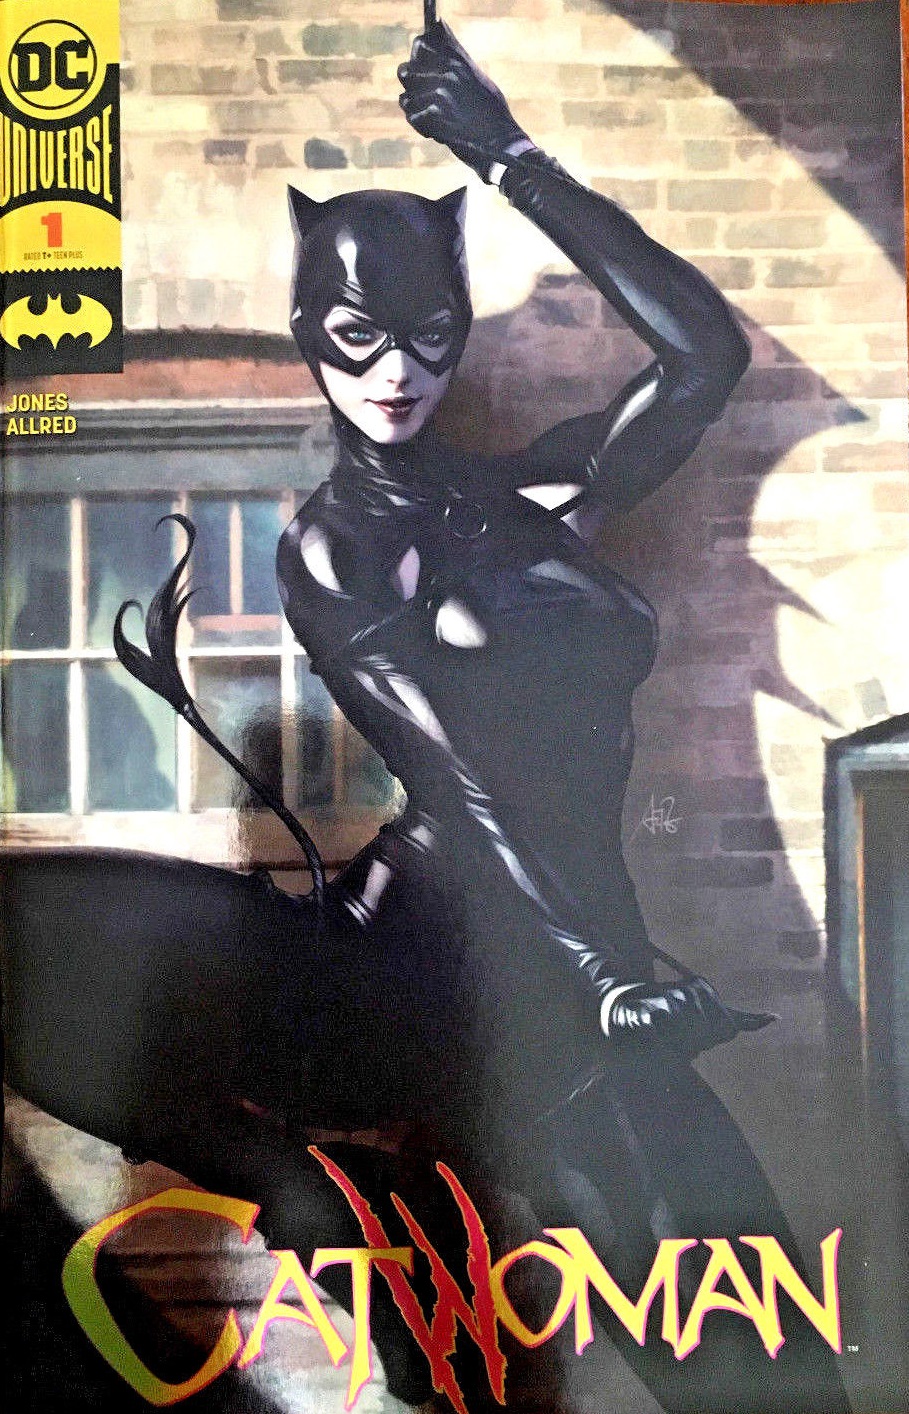 San Diego ComicCon 2018 - Exclusive Catwoman #1 Artgerm Gold Foil Variant Cover (2018)